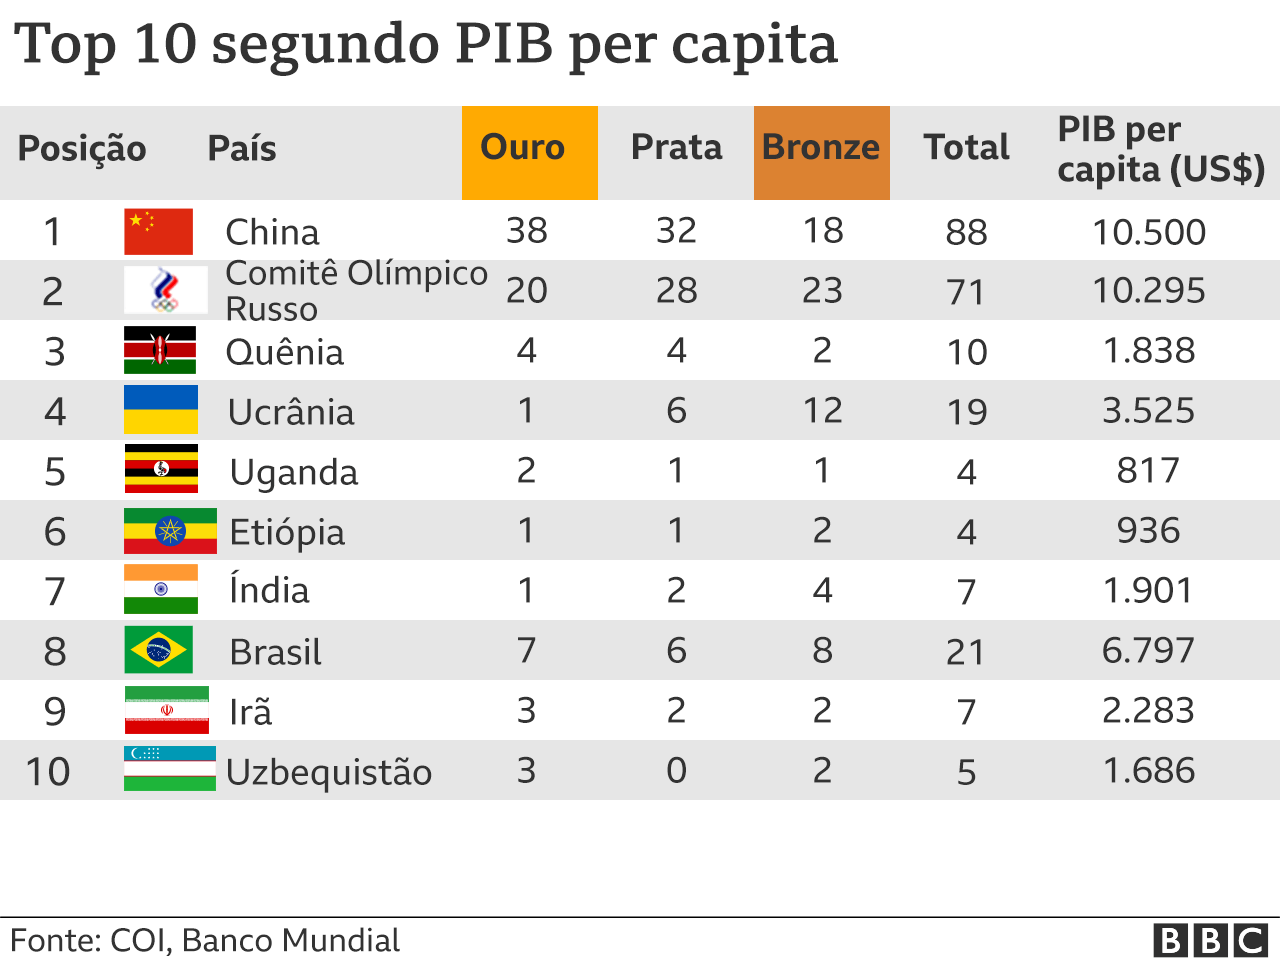 The table shows the medal table by GDP per capita.